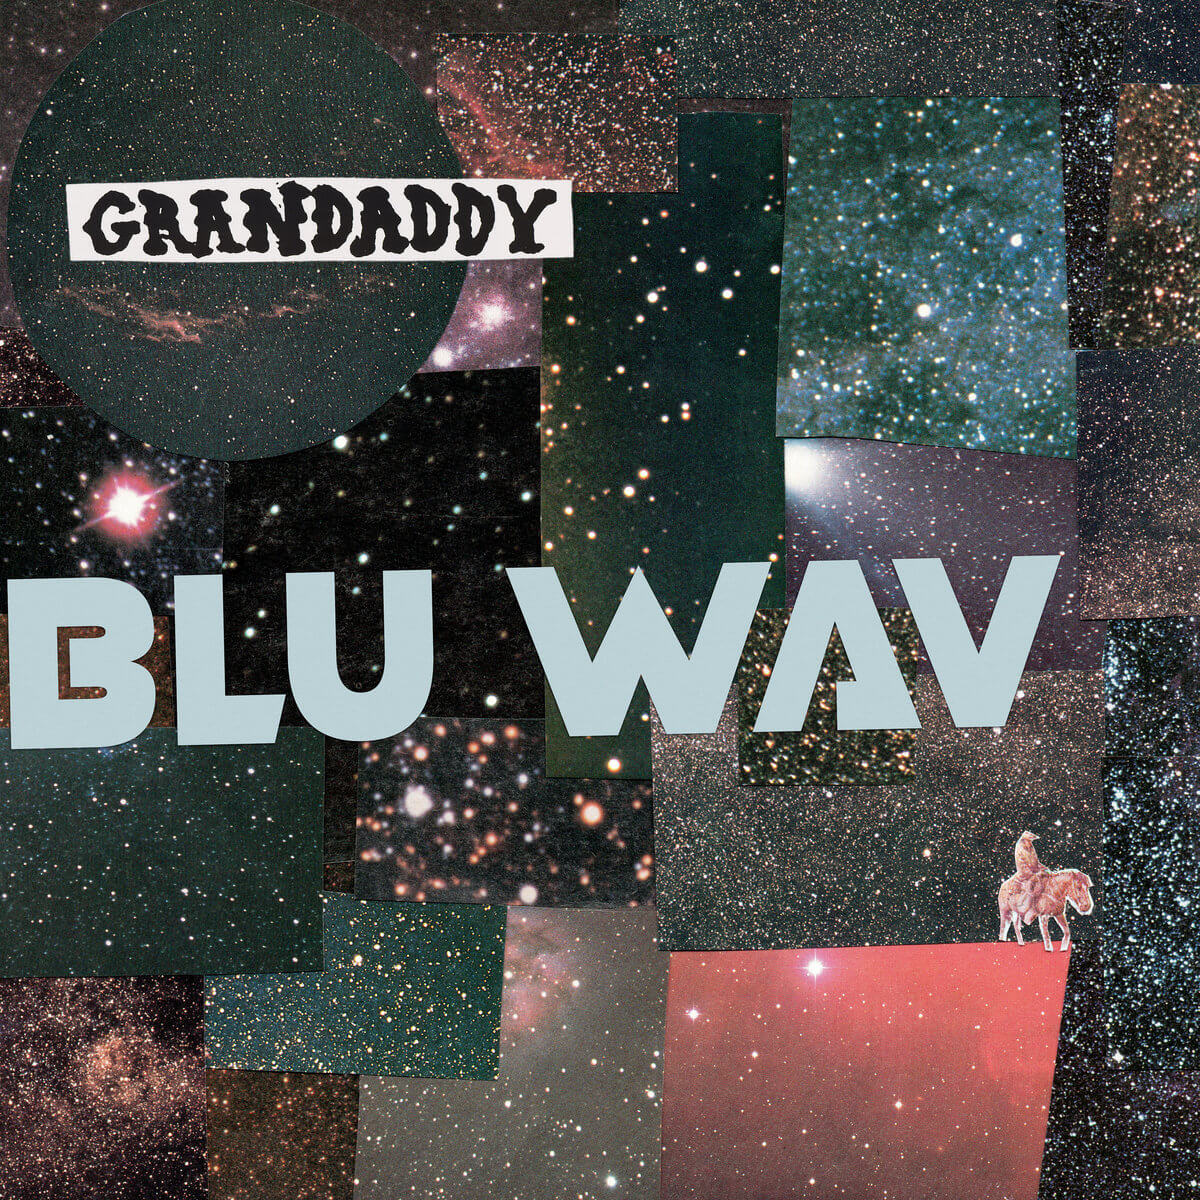 Blu Wav by Grandaddy album review by Ethan Rebalkin for Northern Transmissions. The band's LP drops on January 16th via Dangerbird Records